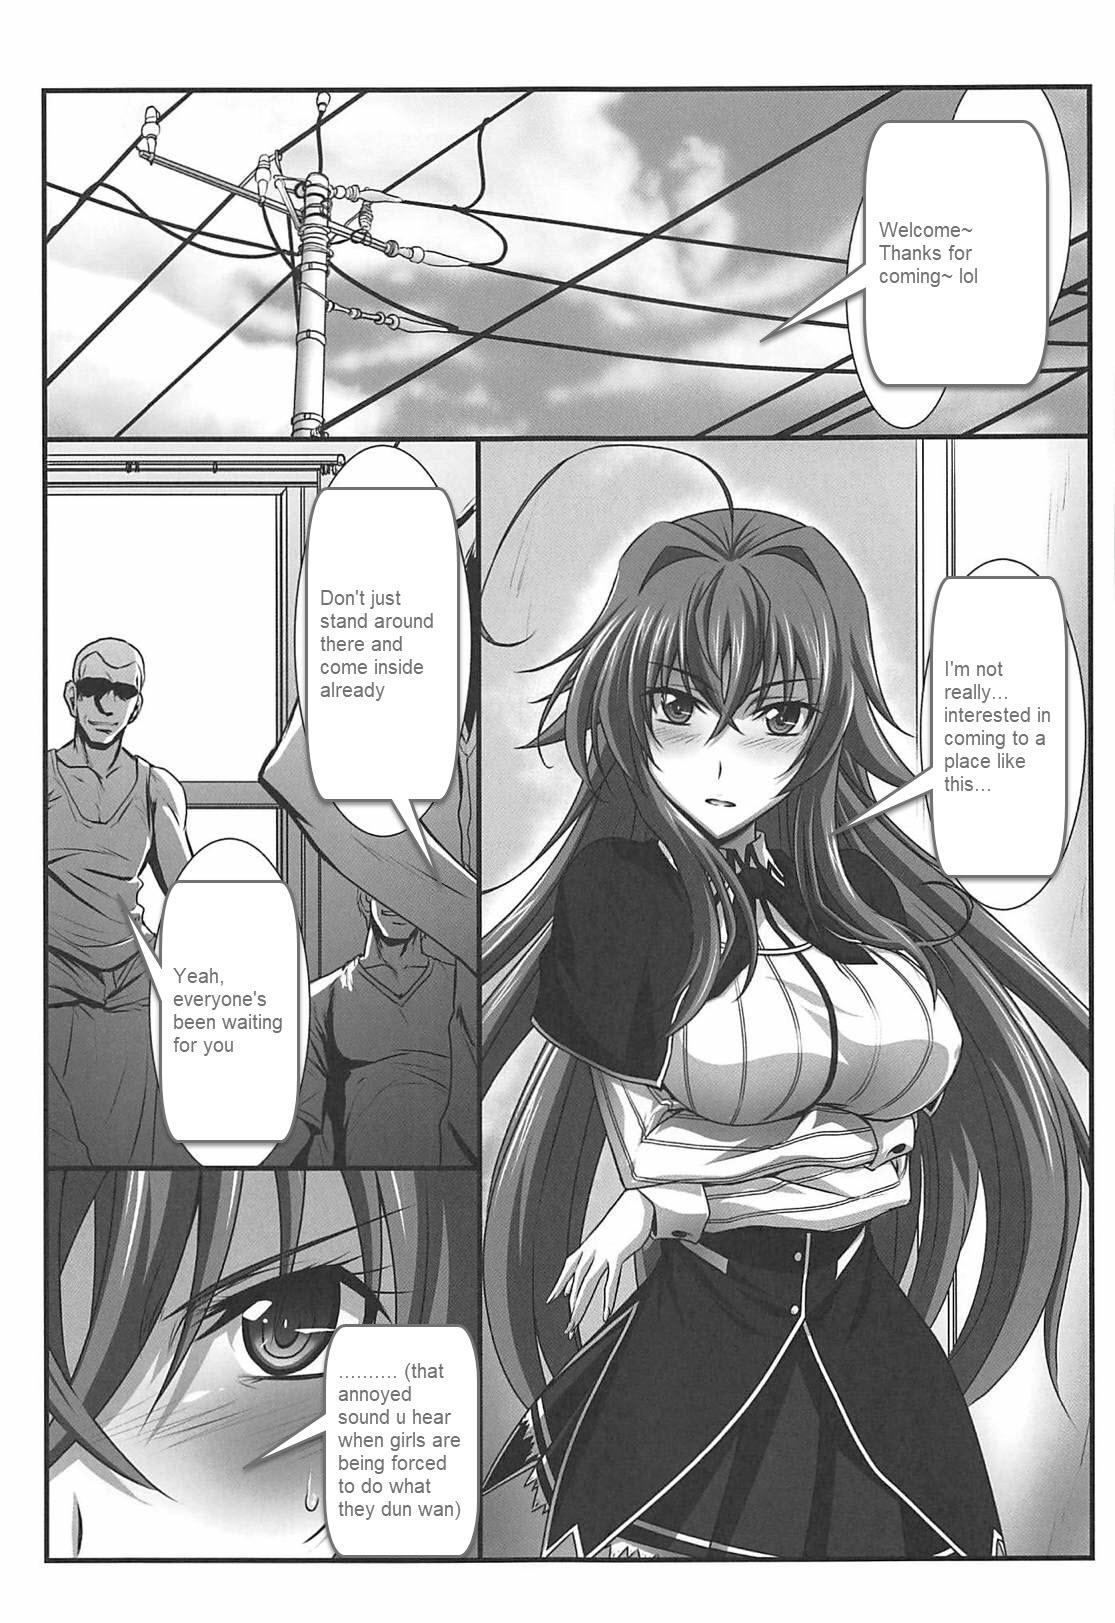 Latin SPIRAL ZONE DxD II - Highschool dxd Femboy - Page 4